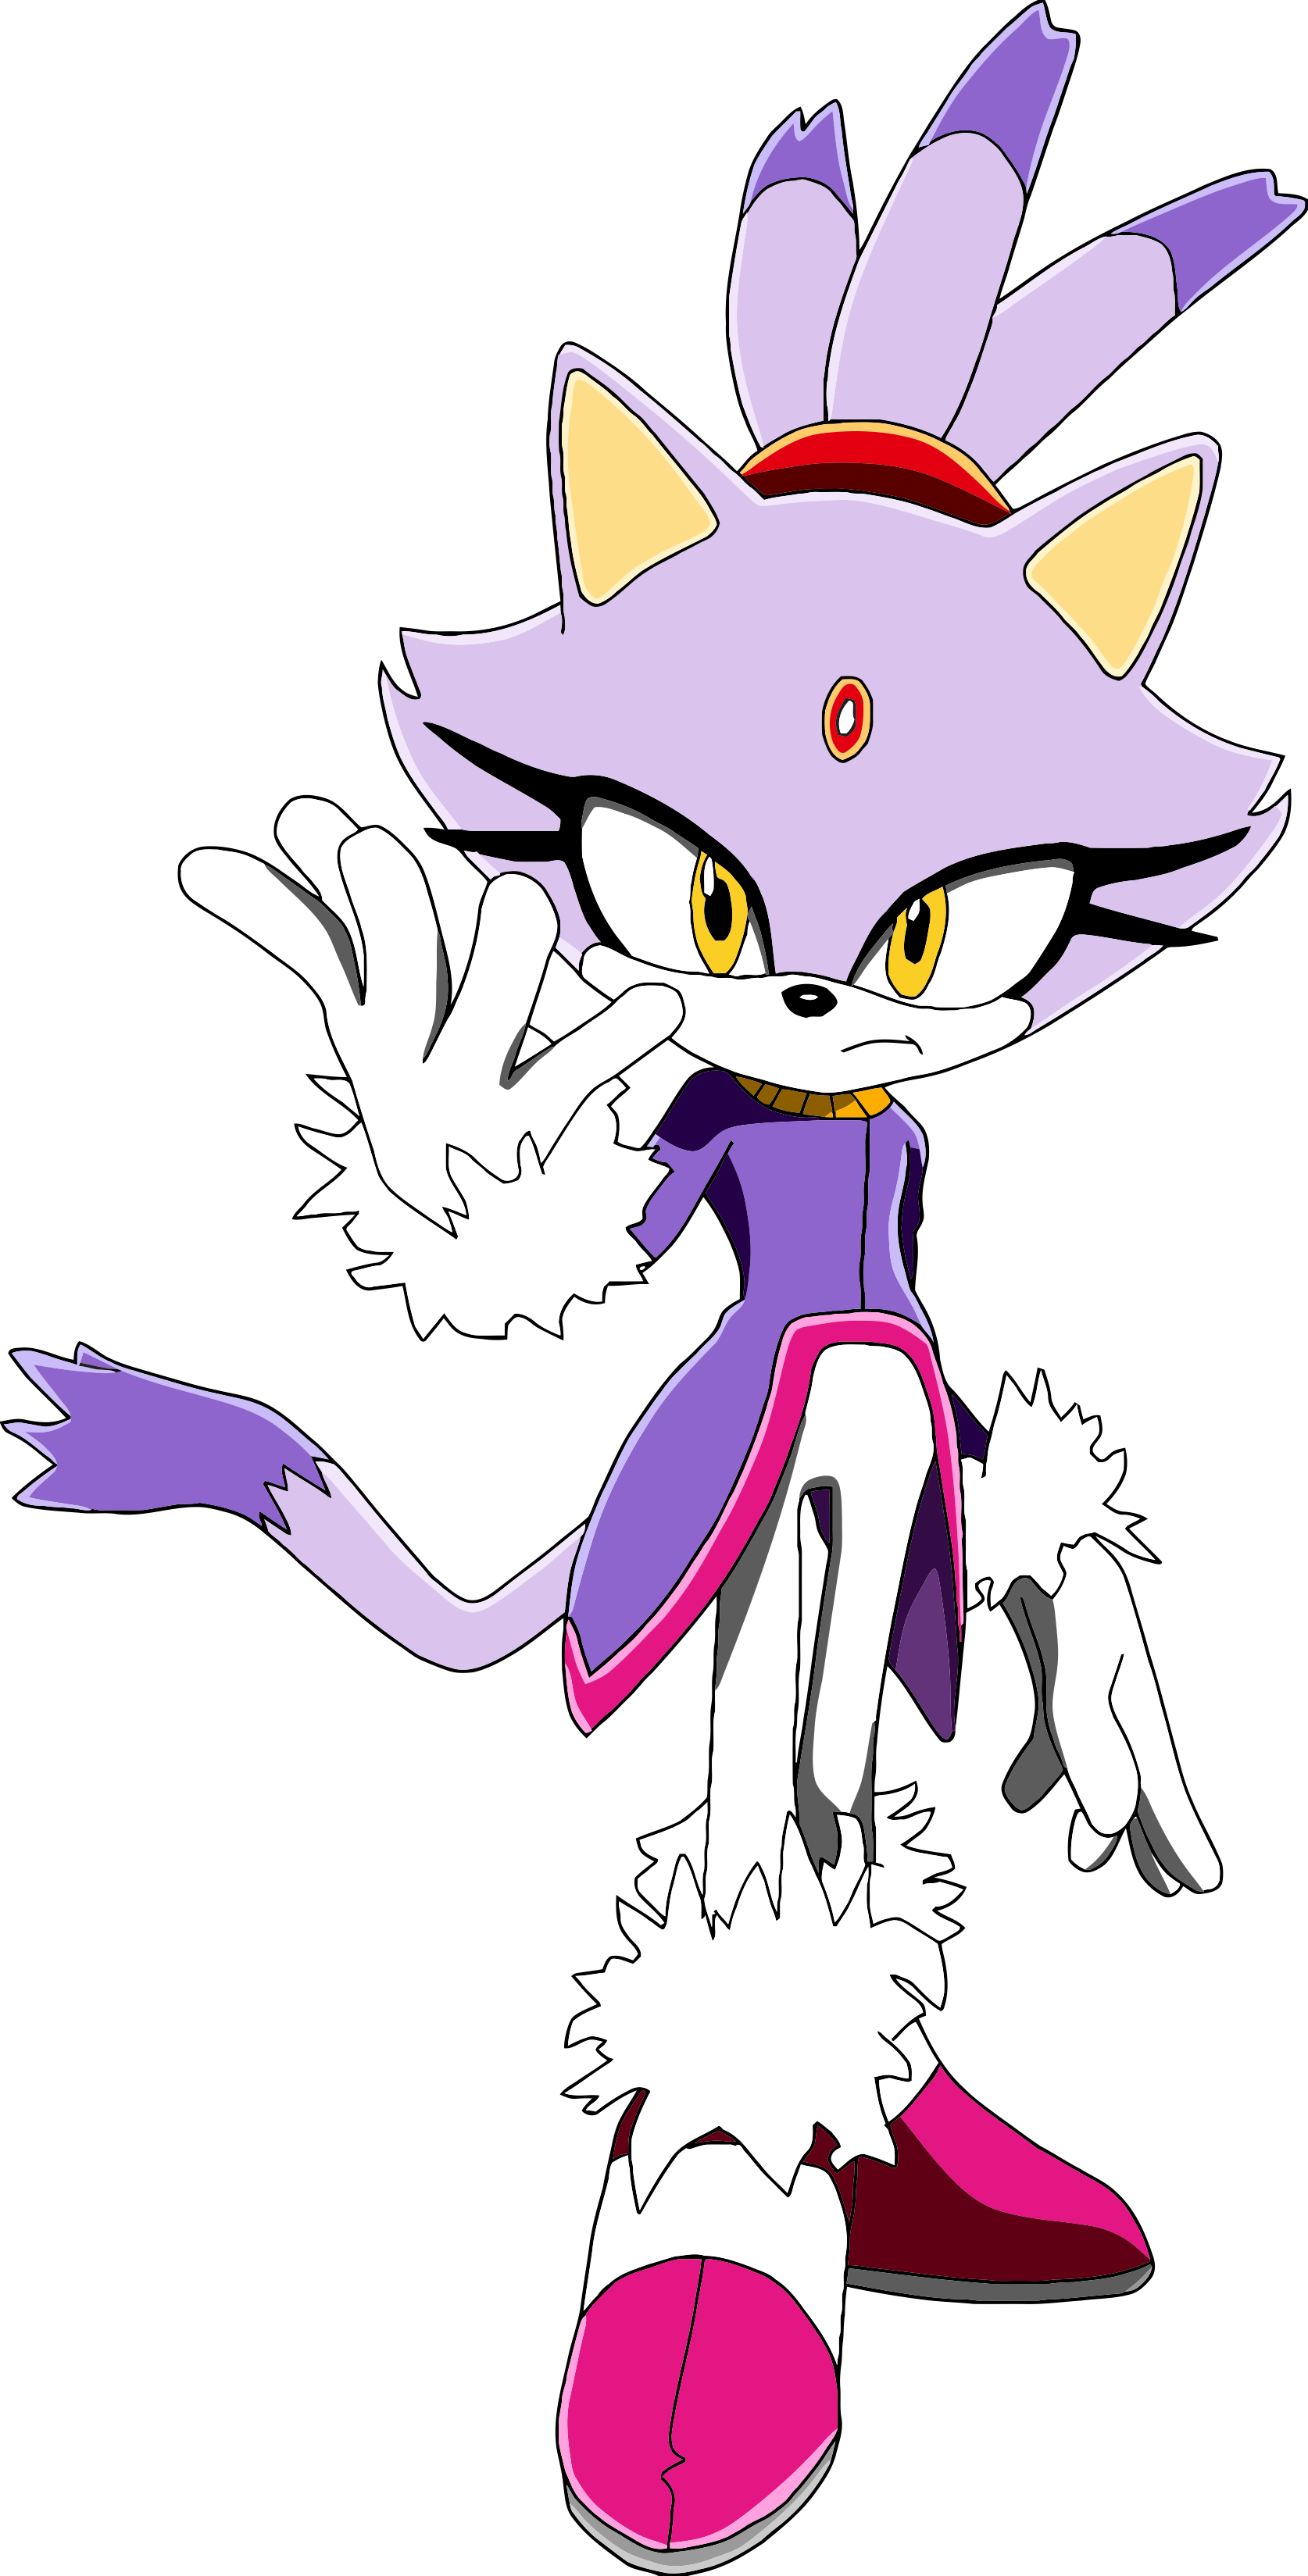 Image - Blaze the Cat - Strength.png - Sonic News Network, the Sonic Wiki